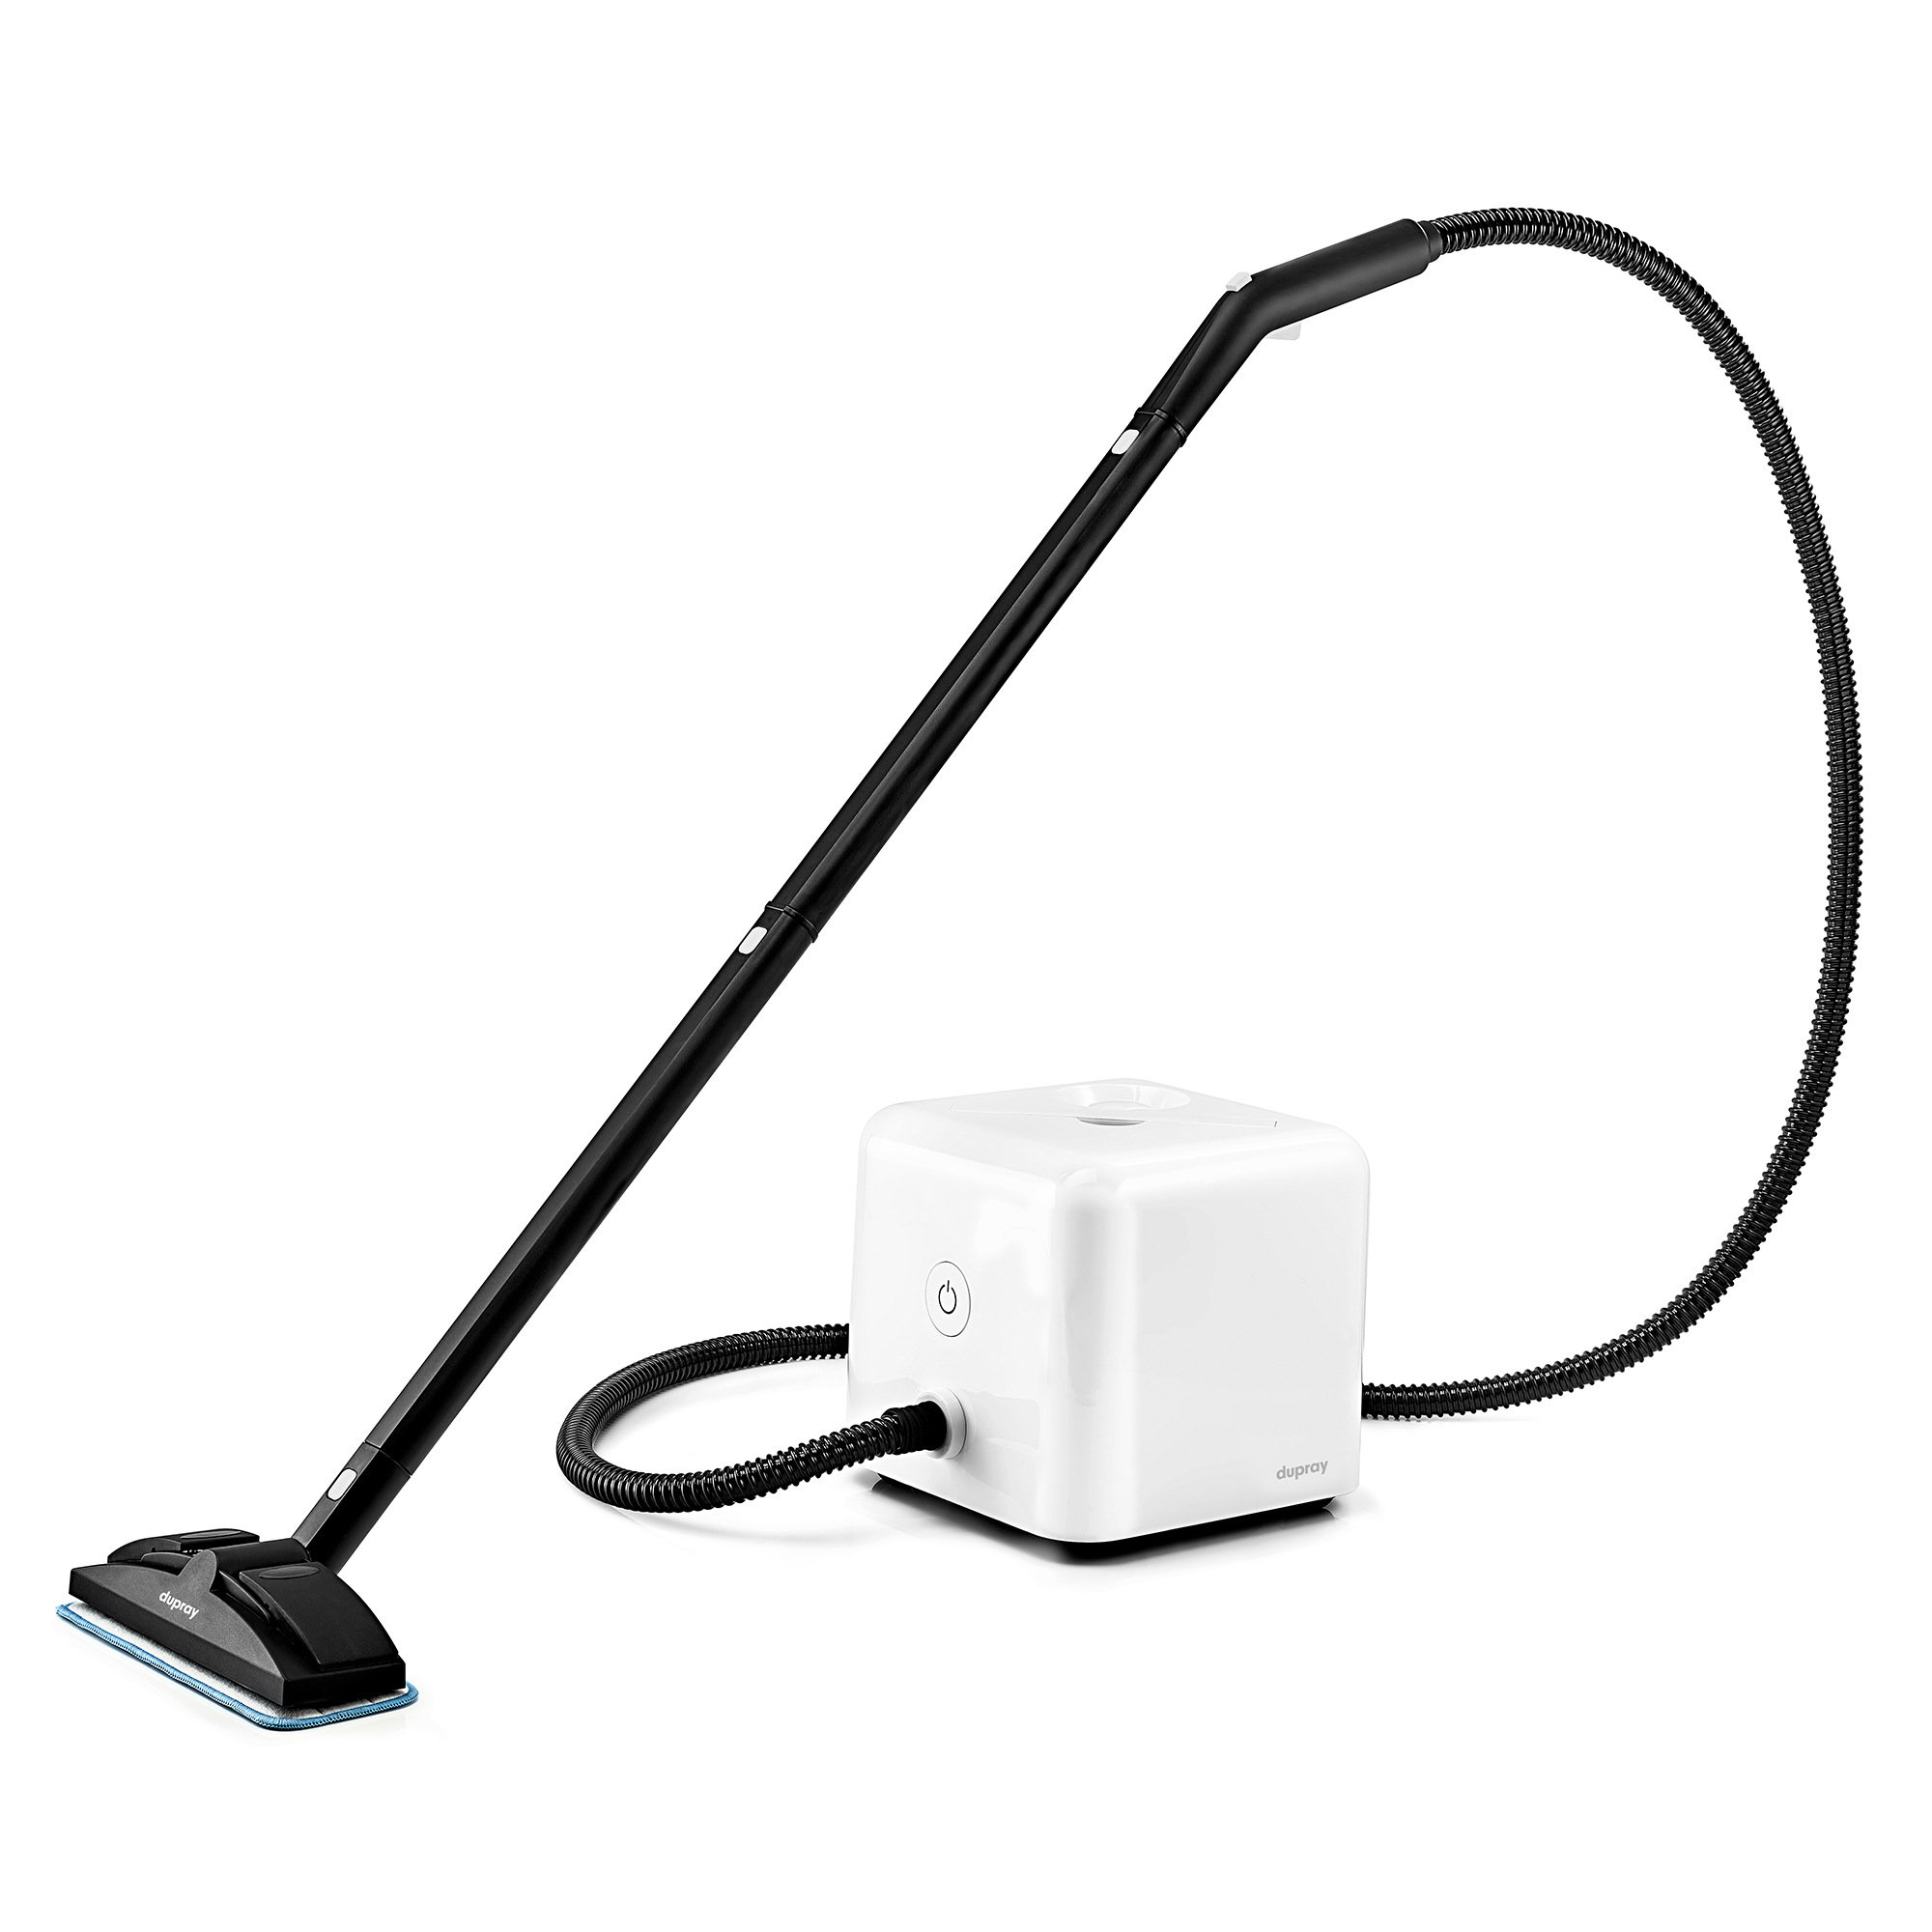 Dupray Neat Steam Cleaner Powerful Multipurpose Portable Heavy Duty Steamer for Floors, Cars, Tiles, Grout Cleaning. Chemical Free, Disinfection, for Home Use and More. Kills 99.99%* of Bacteria. - image 3 of 14